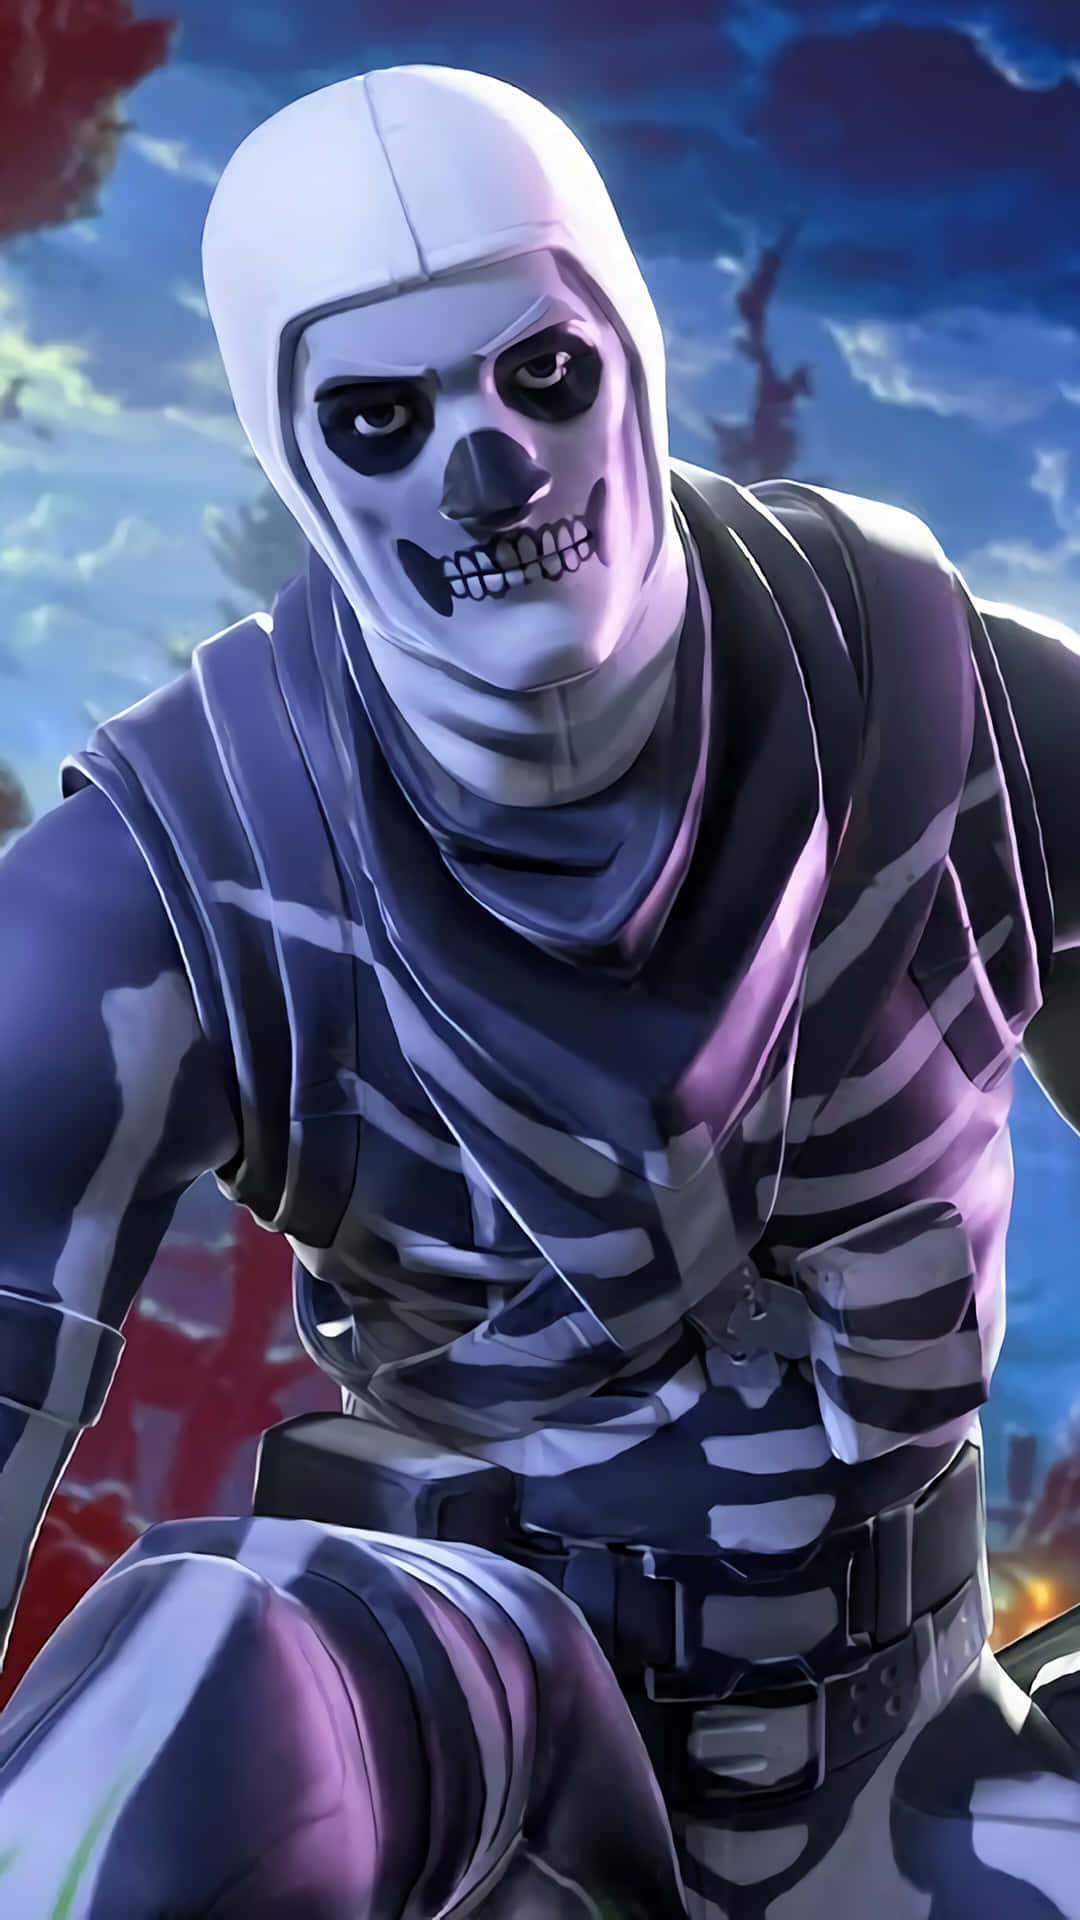 Unleash your inner gamer with the new Purple Skull Trooper outfit! Wallpaper